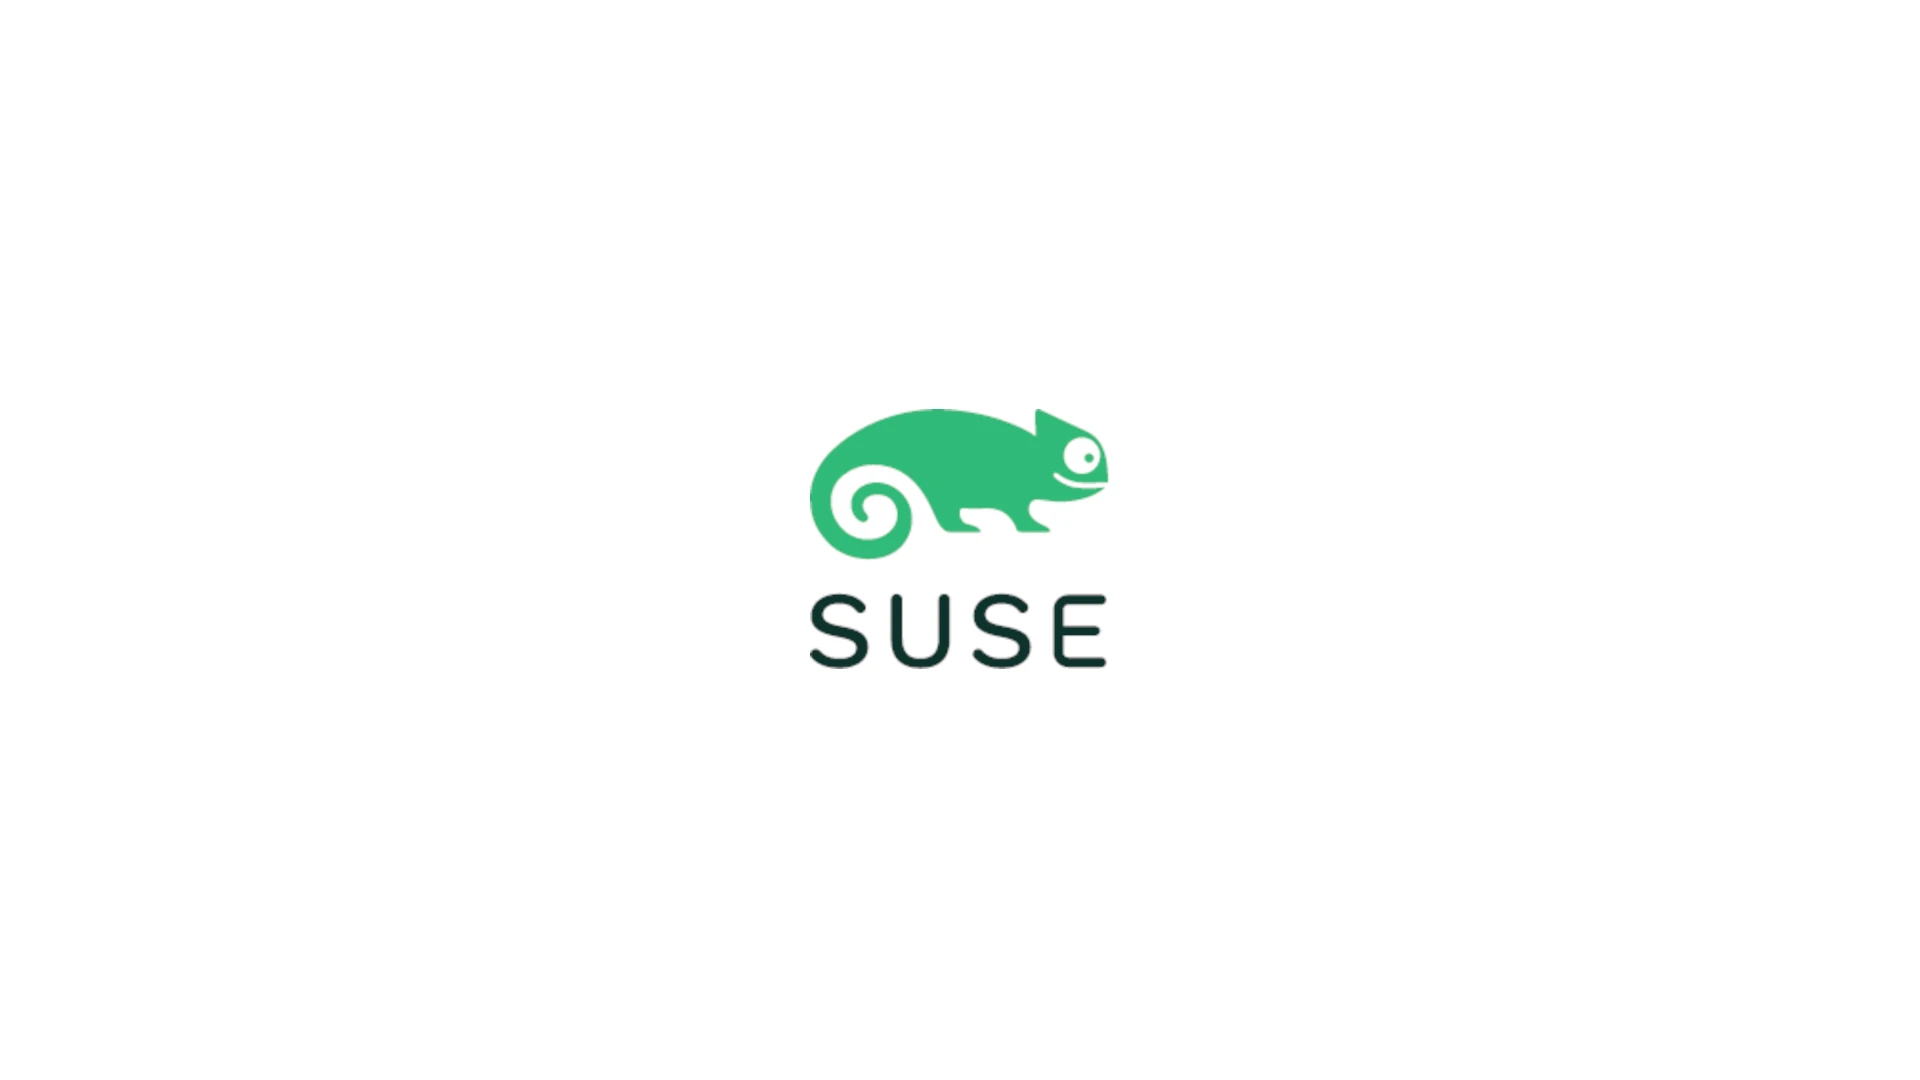 SUSE Announces Free RHEL Fork to Preserve Choice in Enterprise Linux